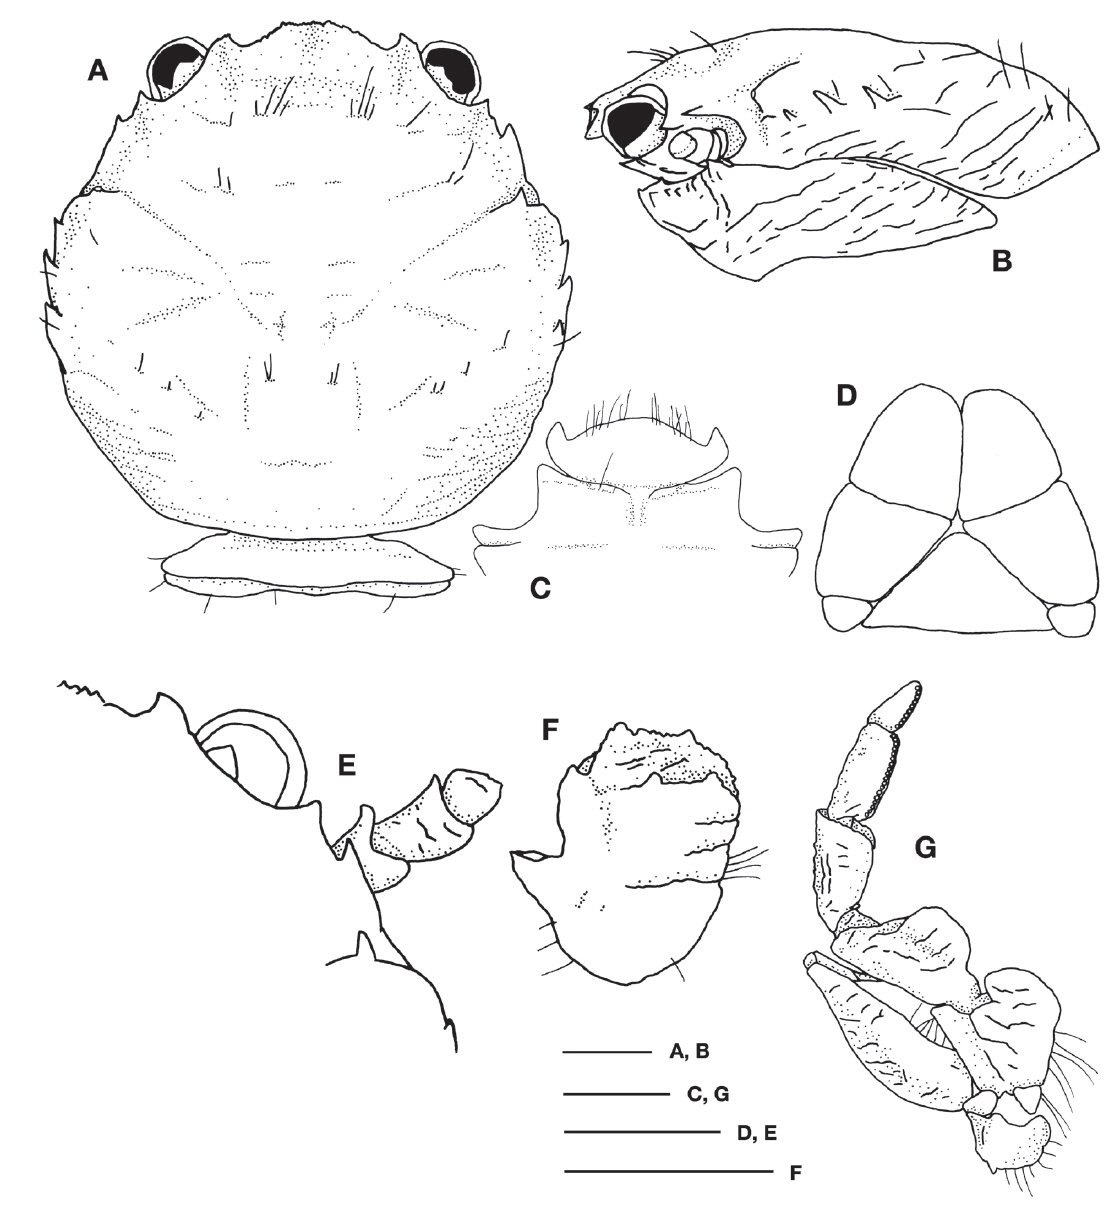 Aliaporcellana pygmaea (De Man, 1902), male (CL 3.2 mm). A, Carapace, anterior part of abdomen; B, Carapace and left pterygostomian flap, lateral; C, Third and fourth thoracic sternite; D, Telson; E, Right anterior part of carapace, ocular pecuncle, and antennal peduncle; F, Basal segment of left antennular peduncle; G, Right third maxilliped. CL, carapace length from the anterior border excluding rostrum to the posterior border. Scale bars: A-F=0.5 mm.